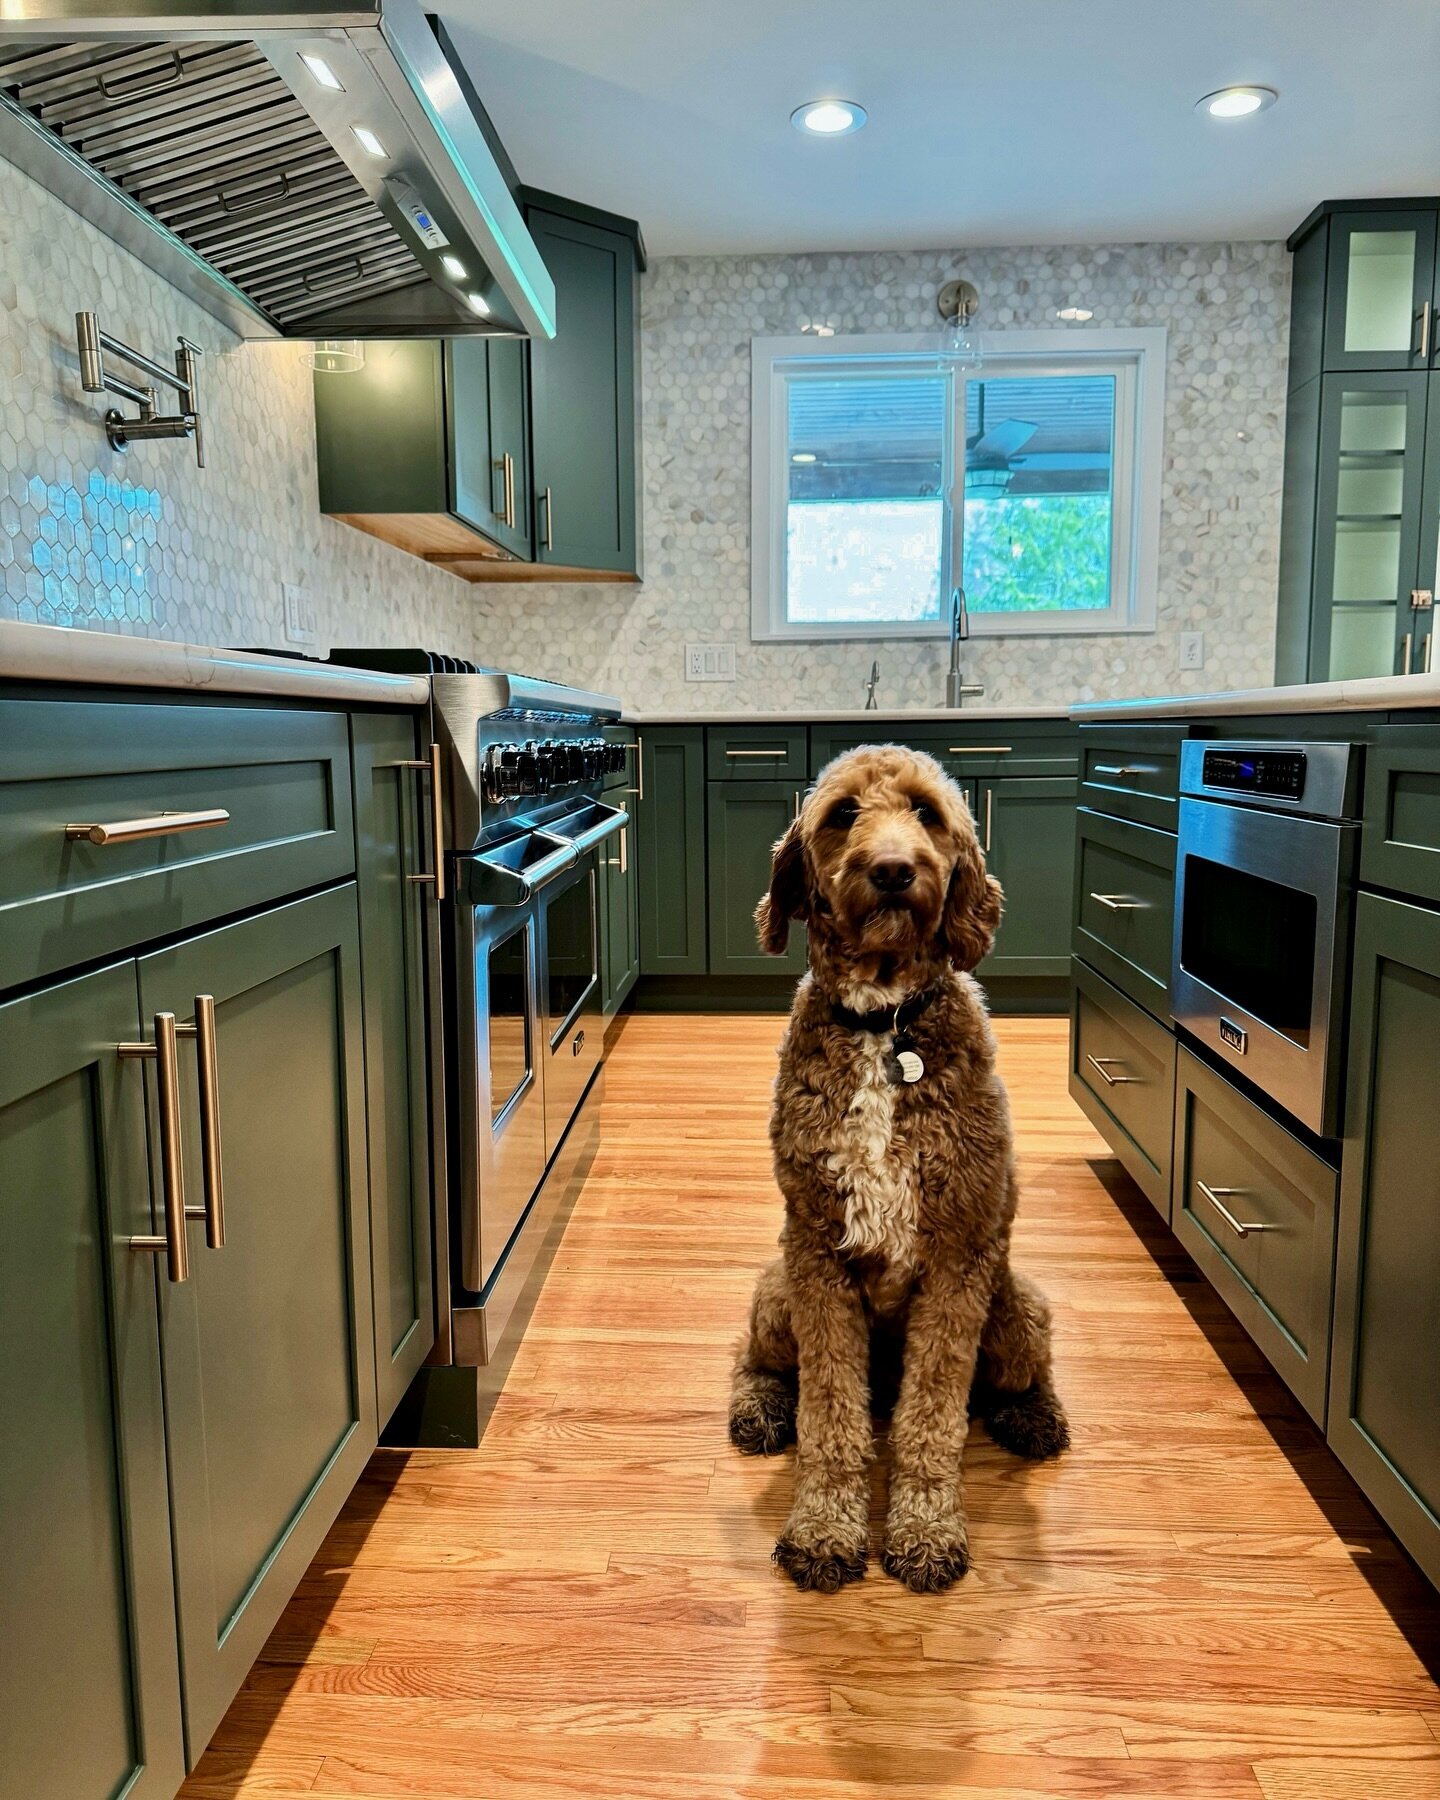 After months of construction on a full house remodel and addition in Frontenac, we&rsquo;re excited to be wrapped up&hellip;but we&rsquo;re really going to miss Jerry! #kitchendesign #dogsofinstagram